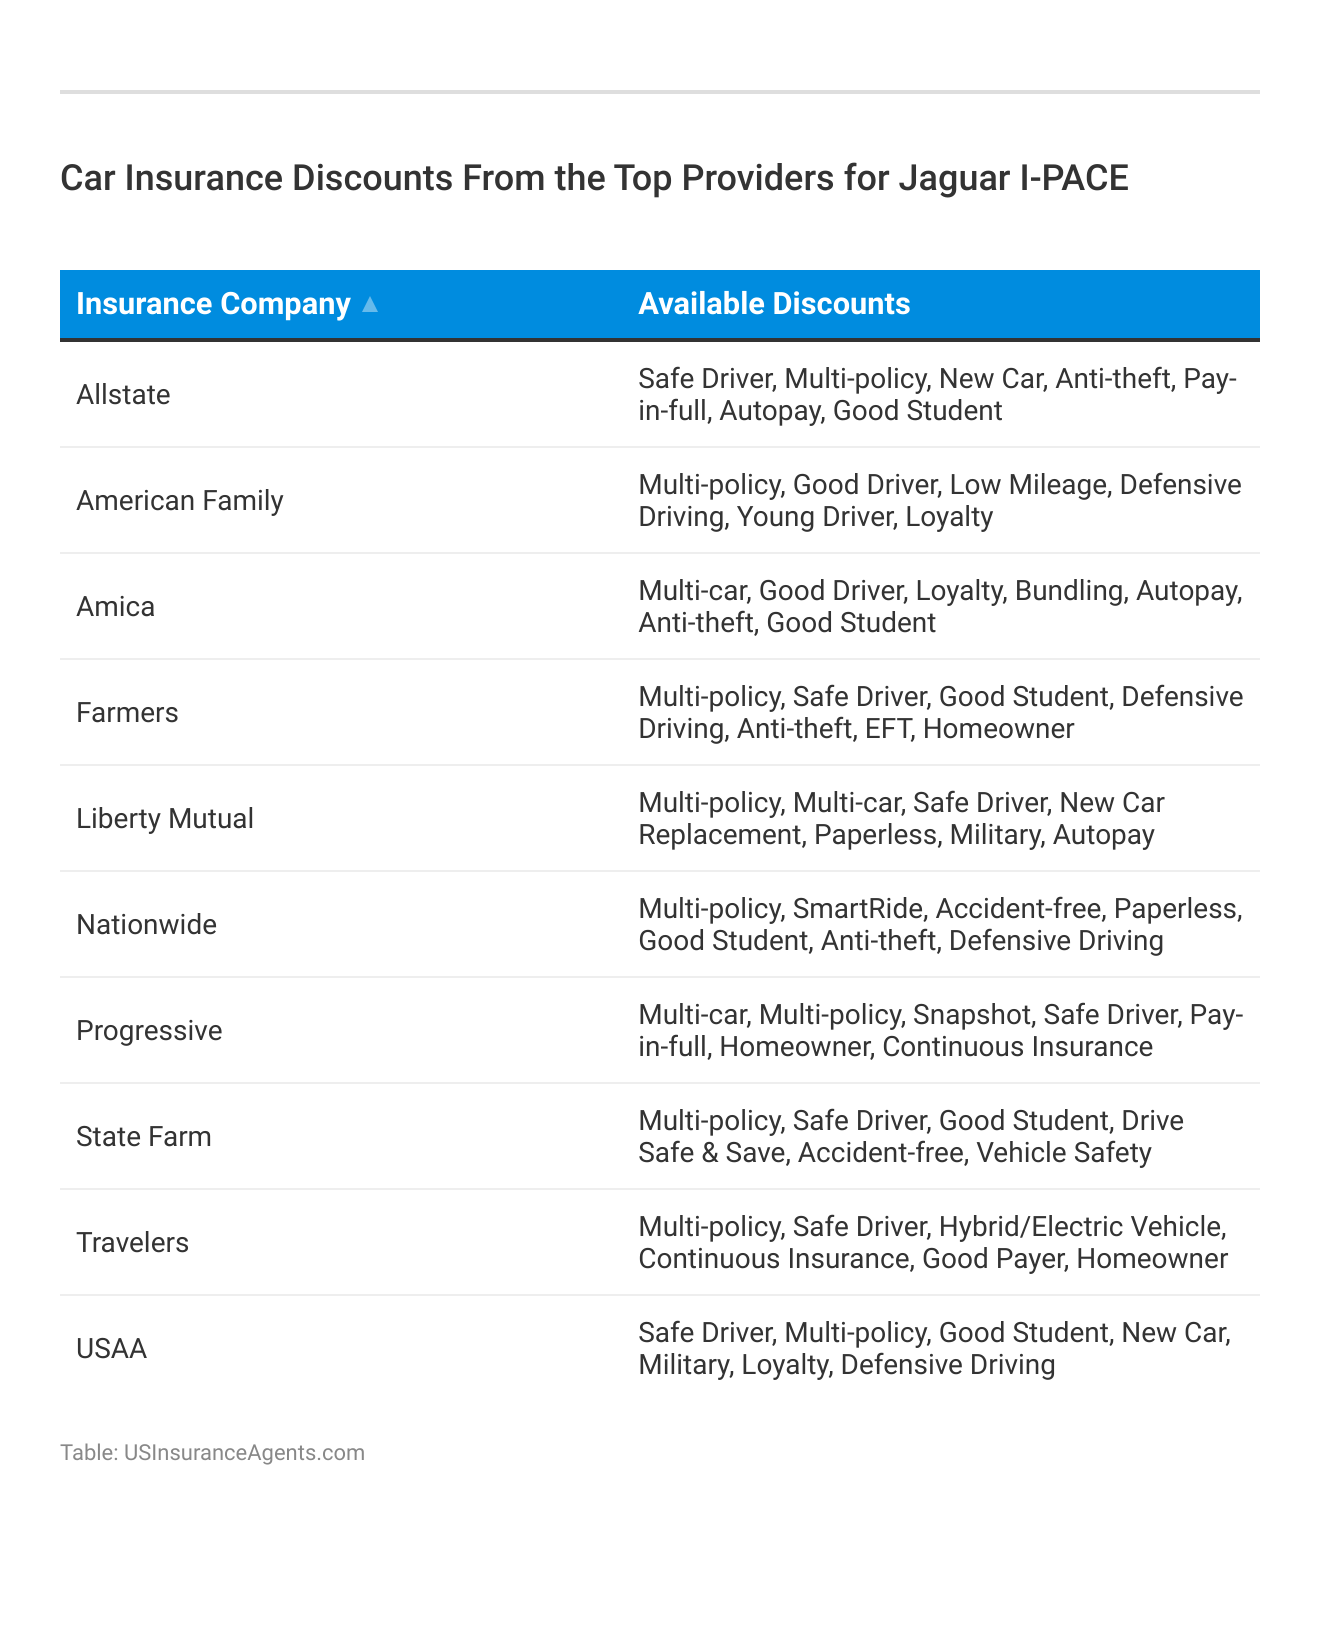 <h3>Car Insurance Discounts From the Top Providers for Jaguar I-PACE</h3>